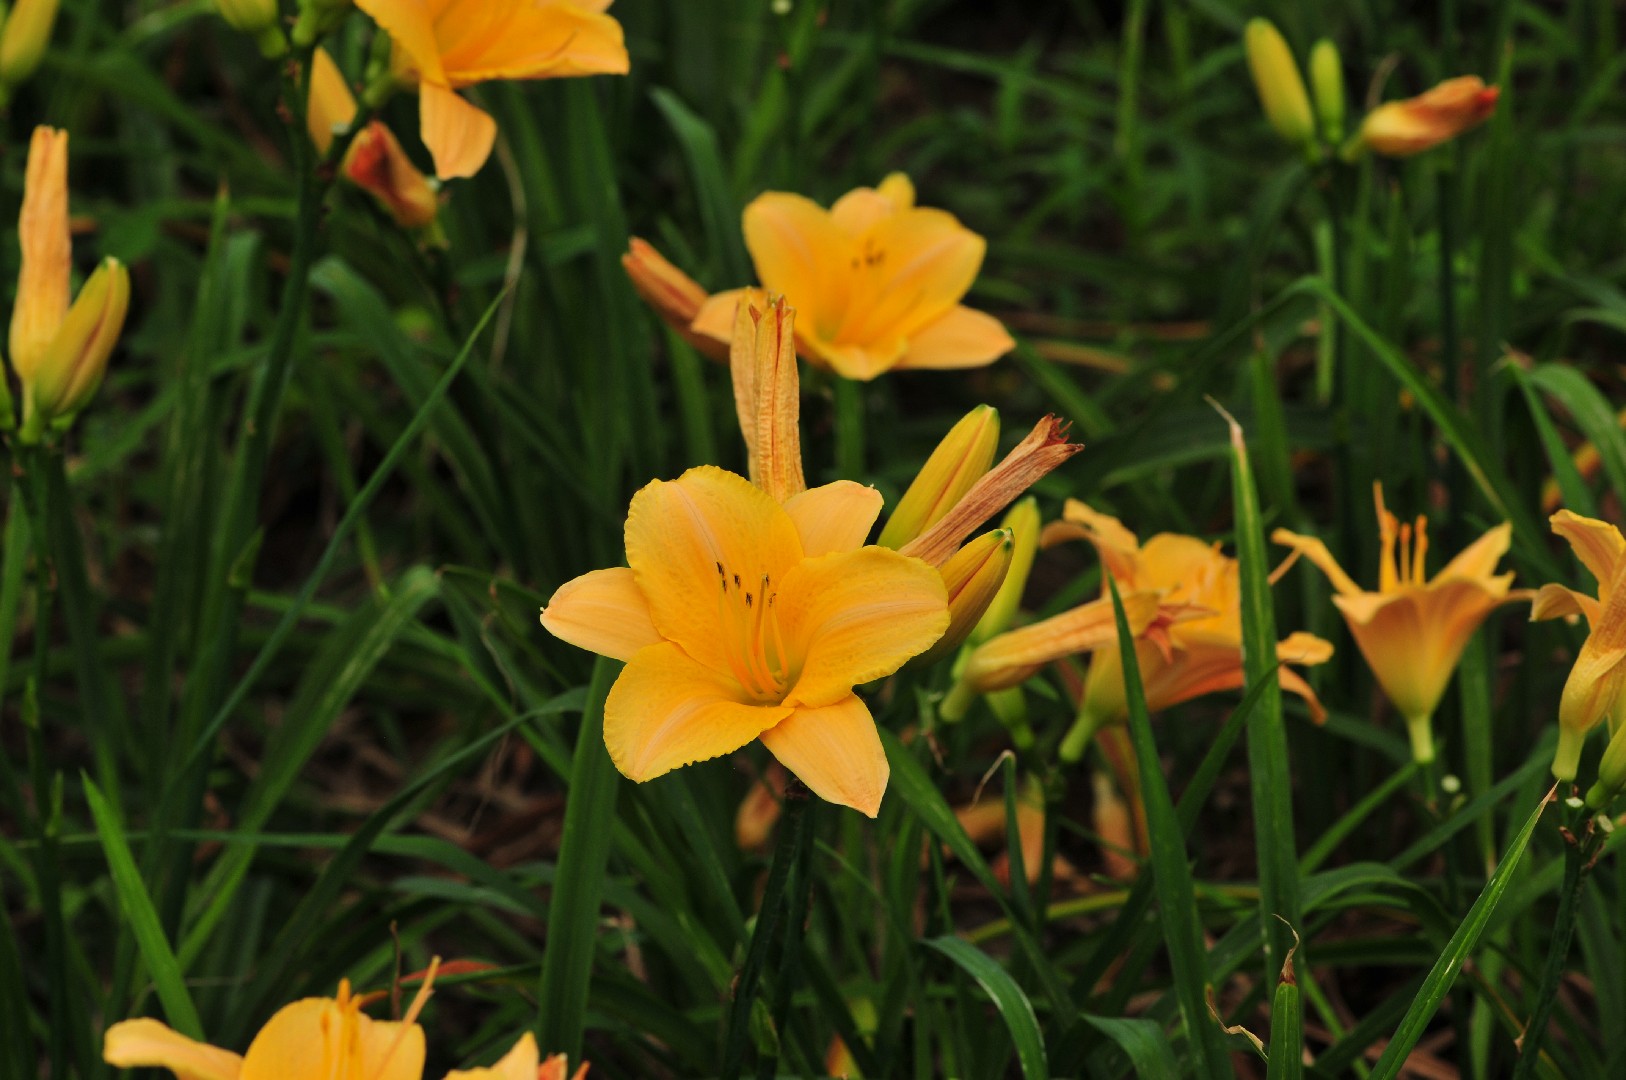 Ditch lily (Hemerocallis fulva) Flower, Leaf, Care, Uses - PictureThis